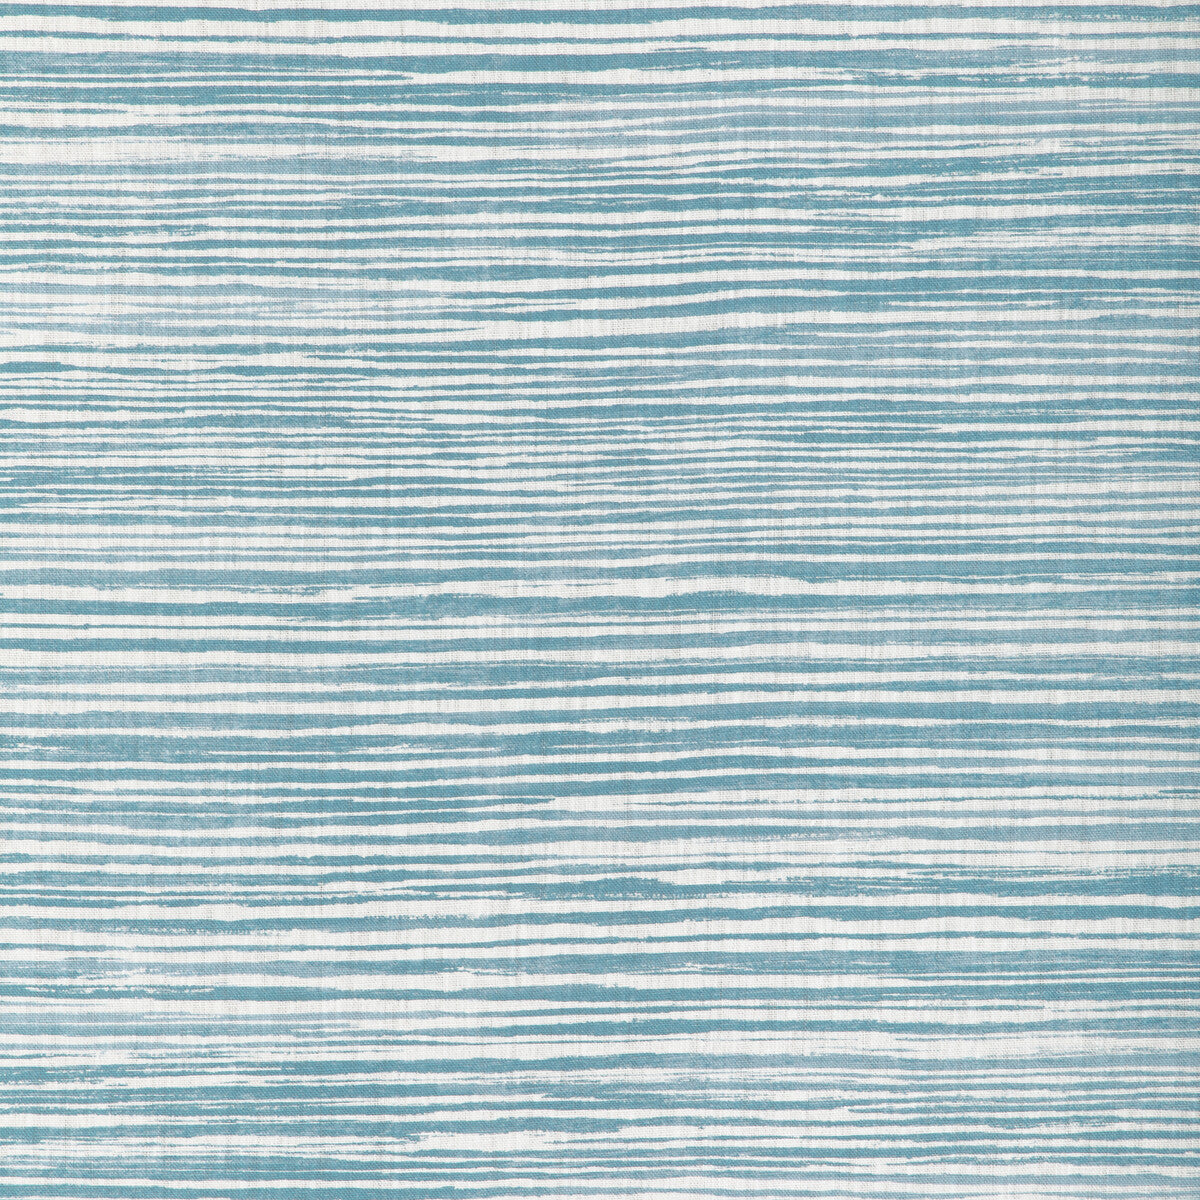 Landlines fabric in sky color - pattern LANDLINES.15.0 - by Kravet Basics in the Small Scale Prints collection